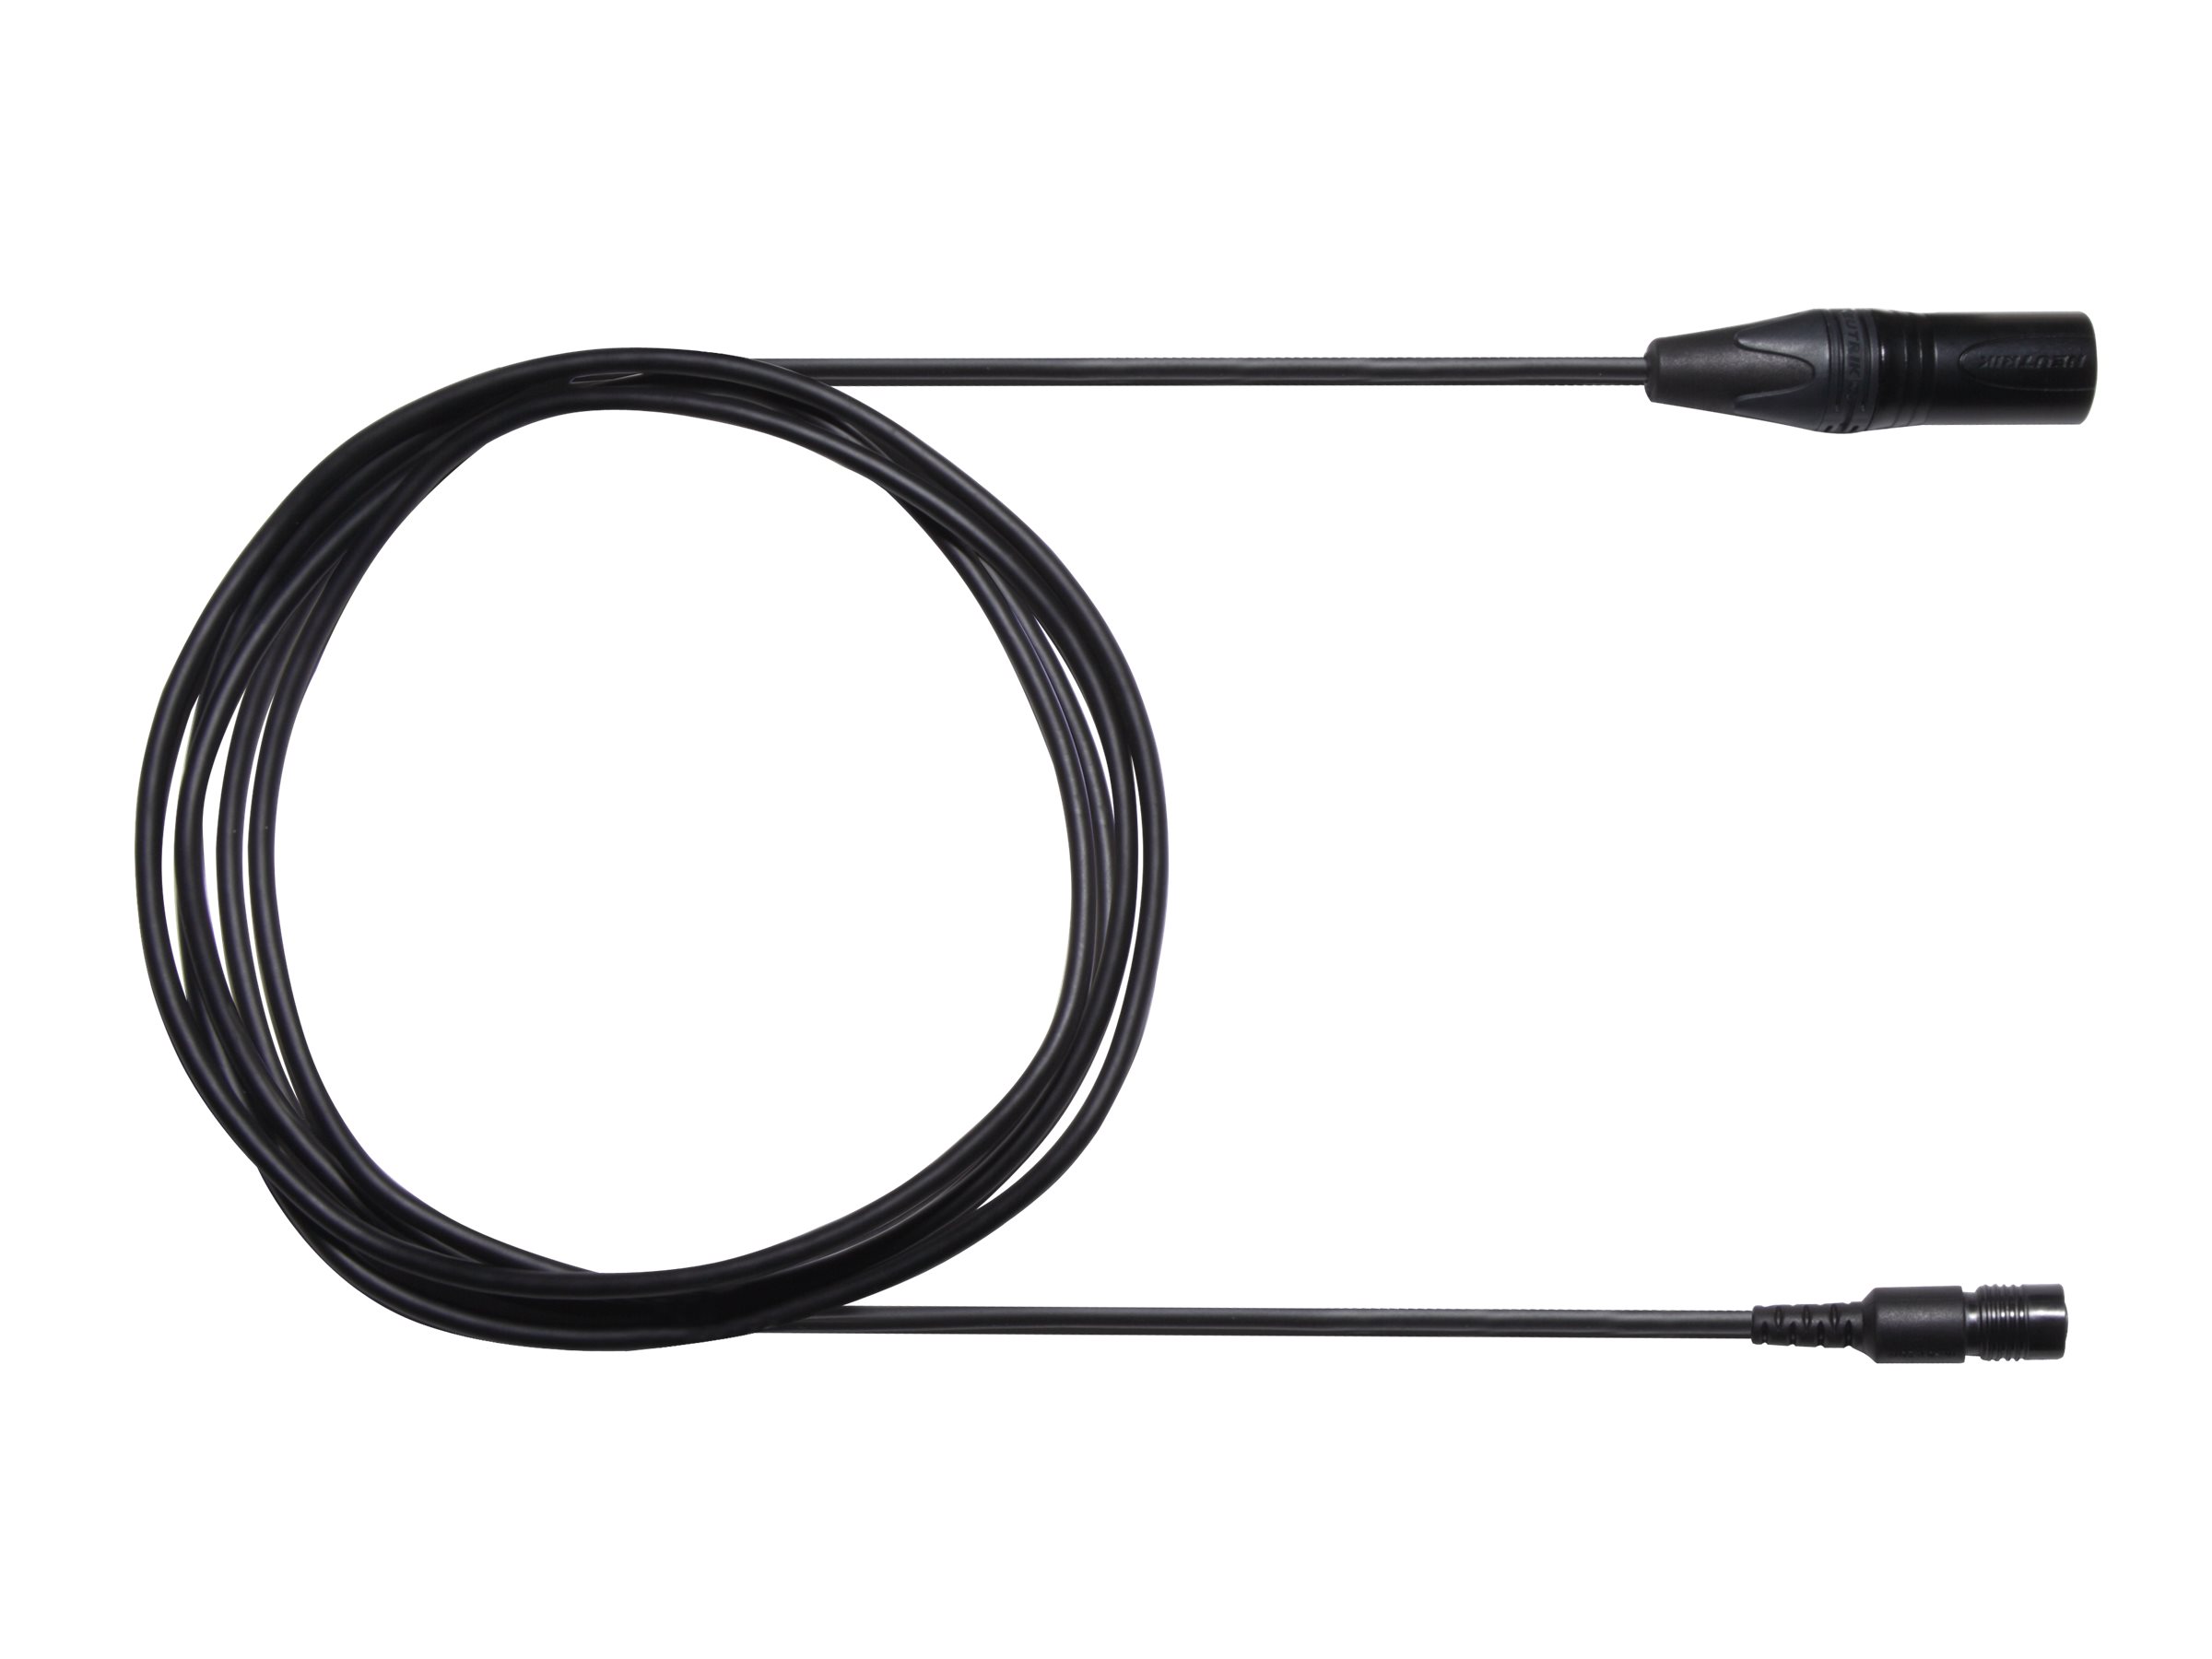 Shure - Audio cable - 4 pin XLR male